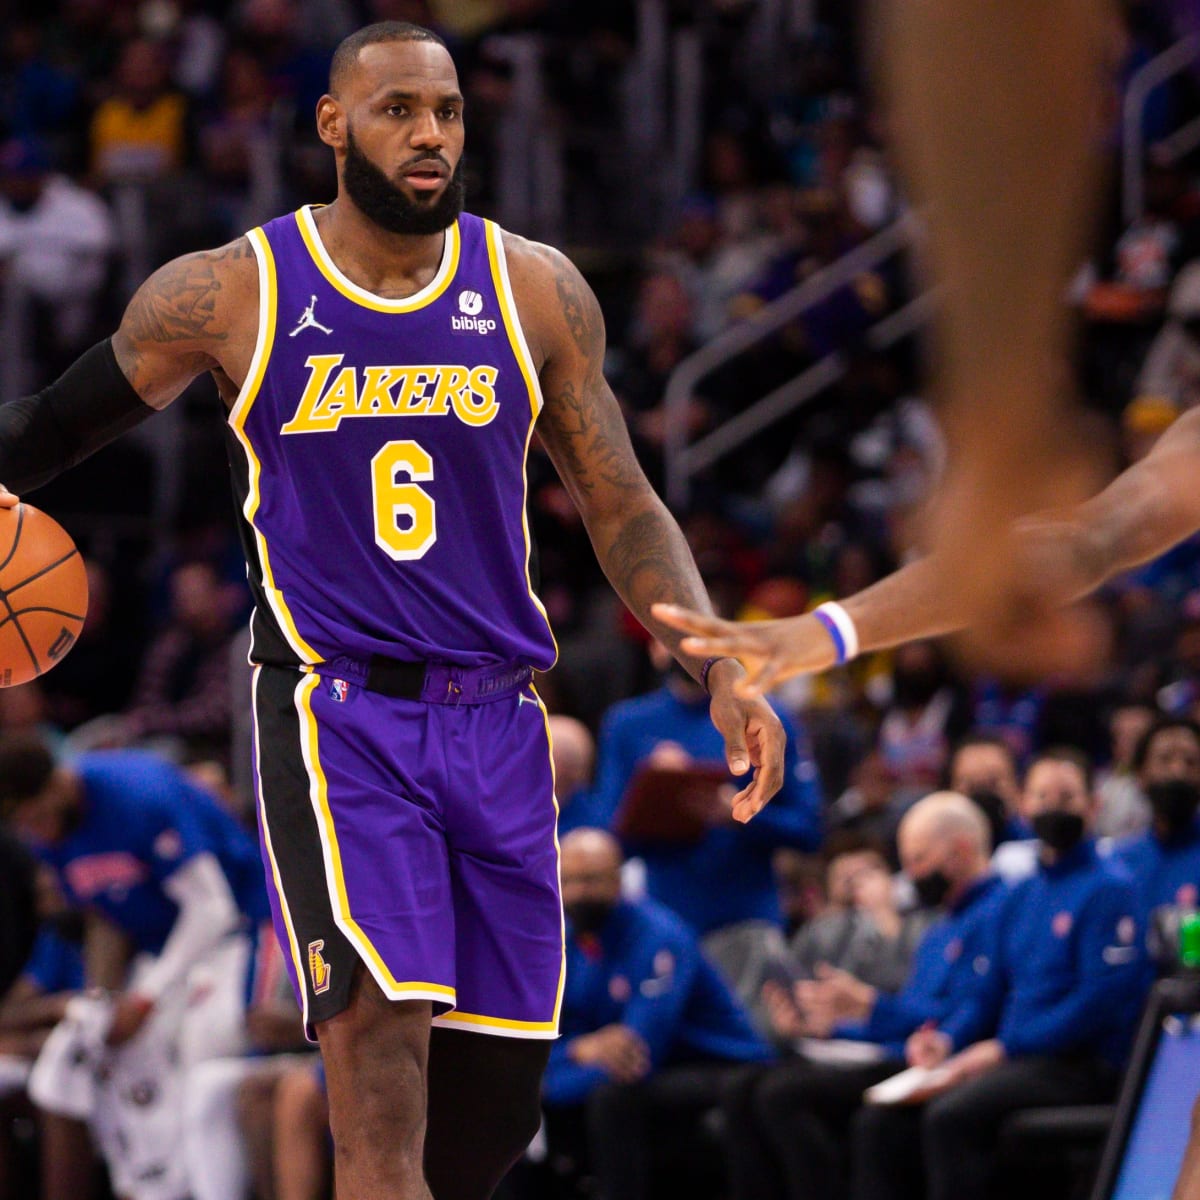 Lakers News: LeBron James Suggests He'll Wear No. 6 Jersey in